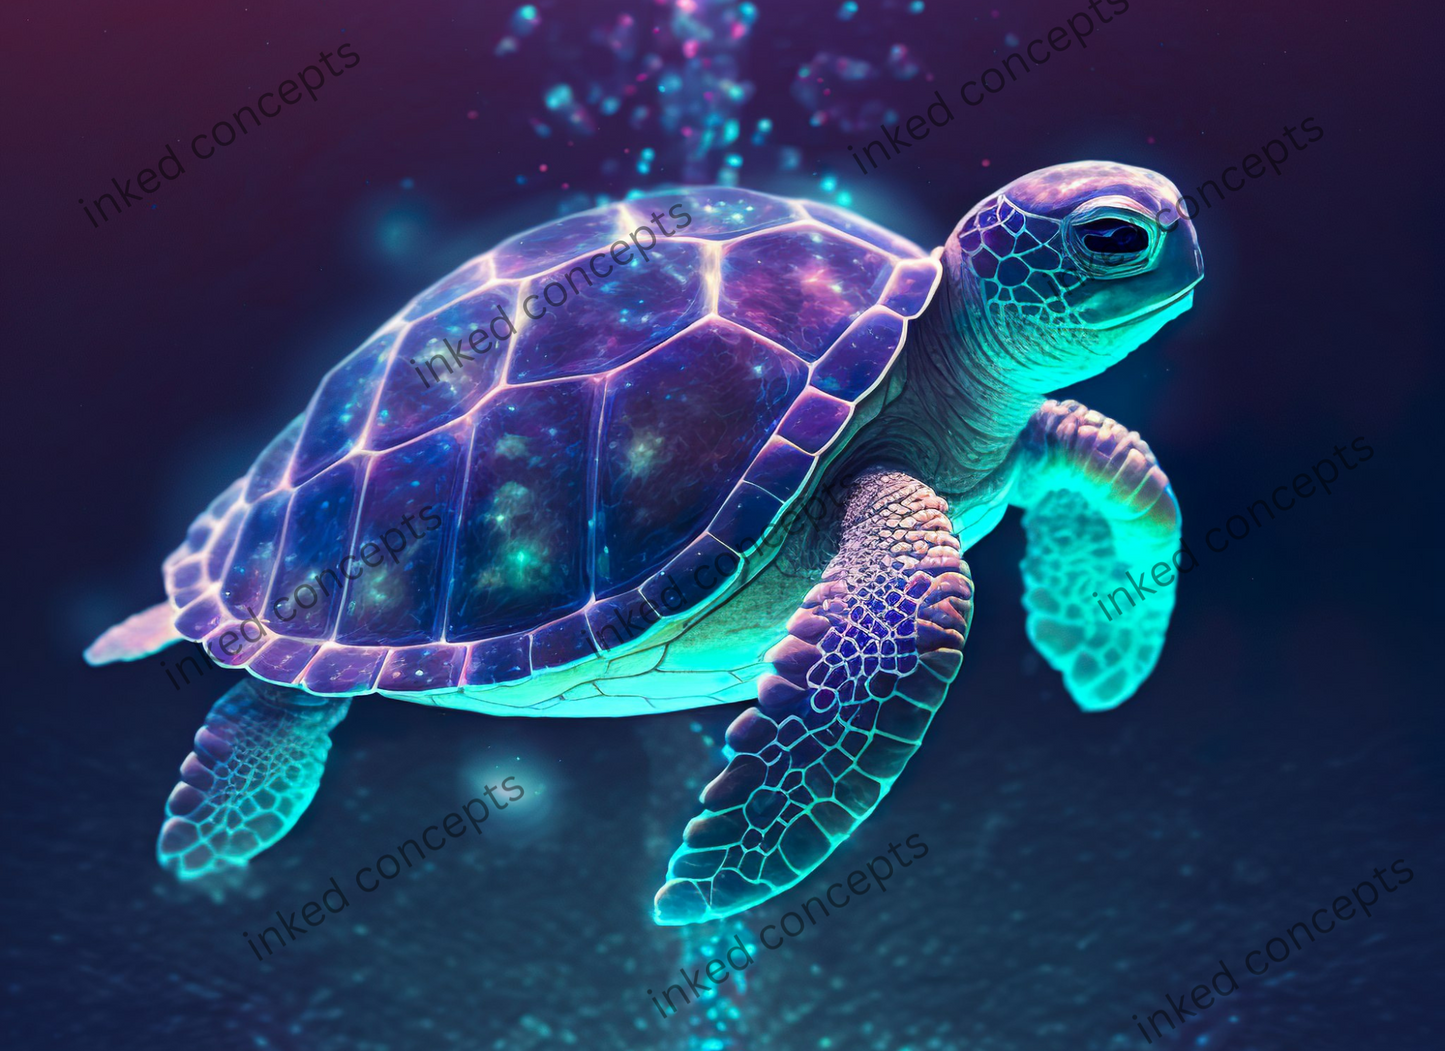 Shelly The Sea Turtle (Glow Available)